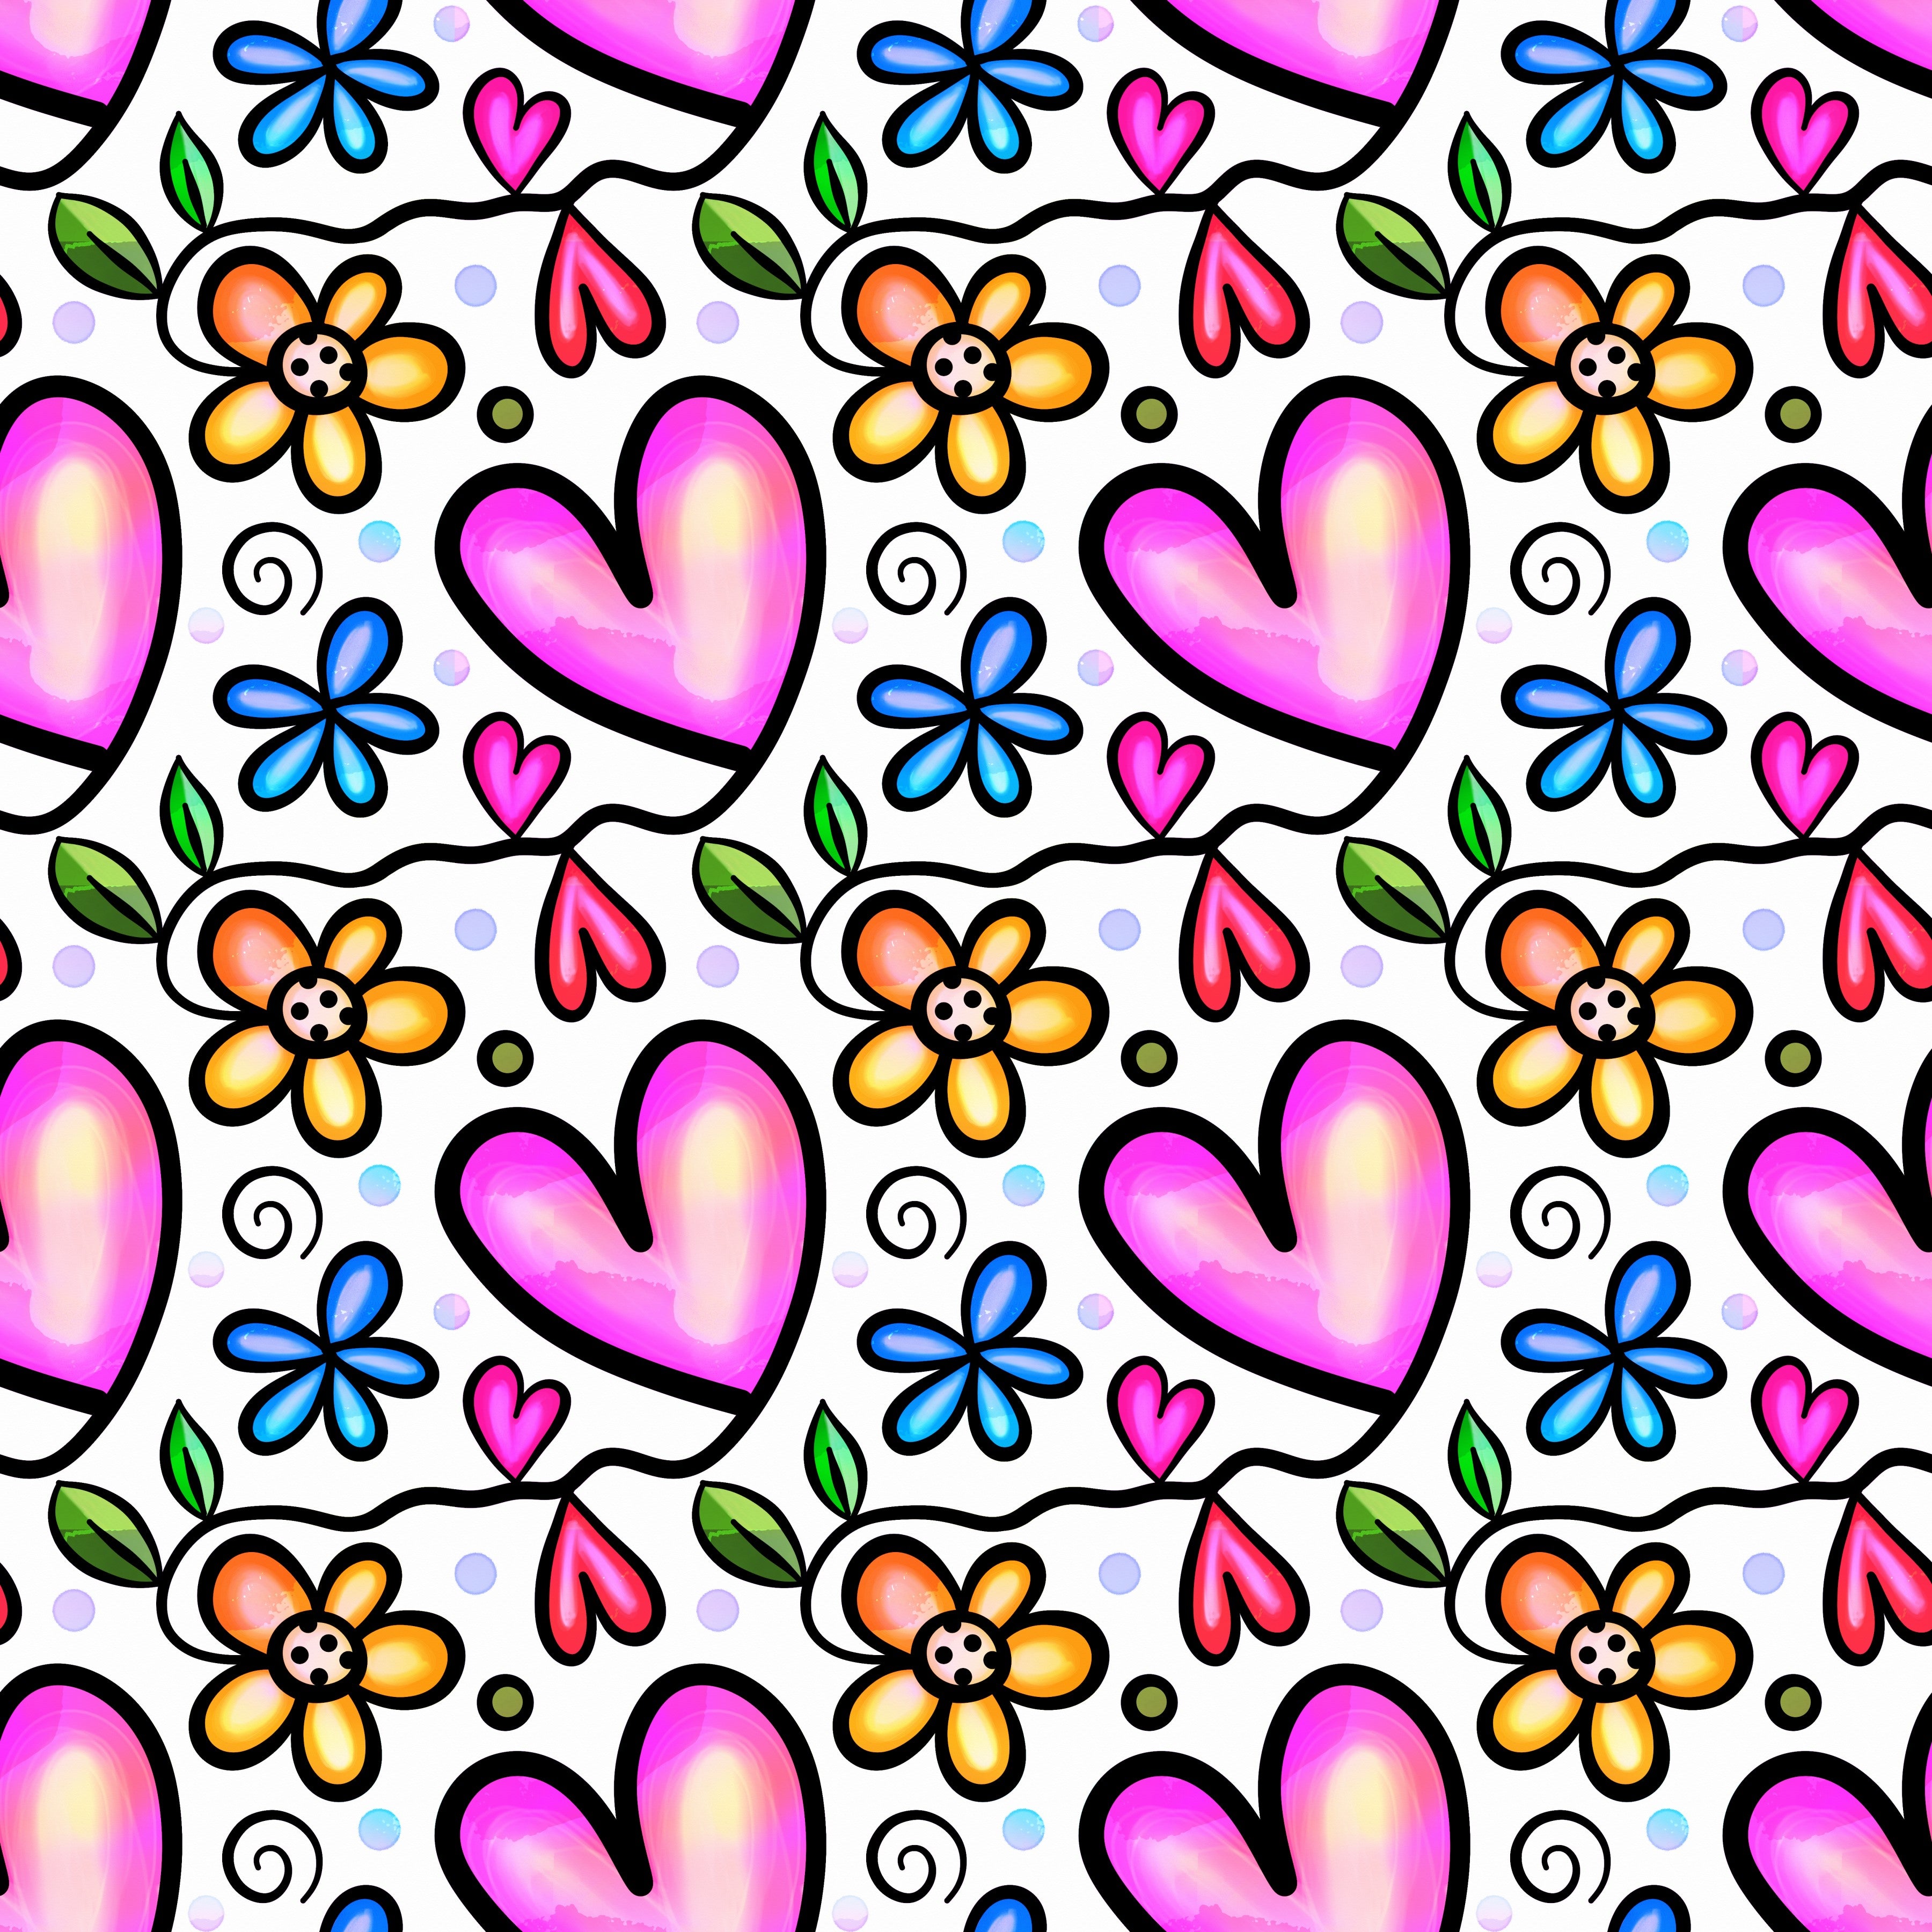 Doodle Hearts and Flowers Pattern Vinyl 12" x 12" - The Vinyl Haus